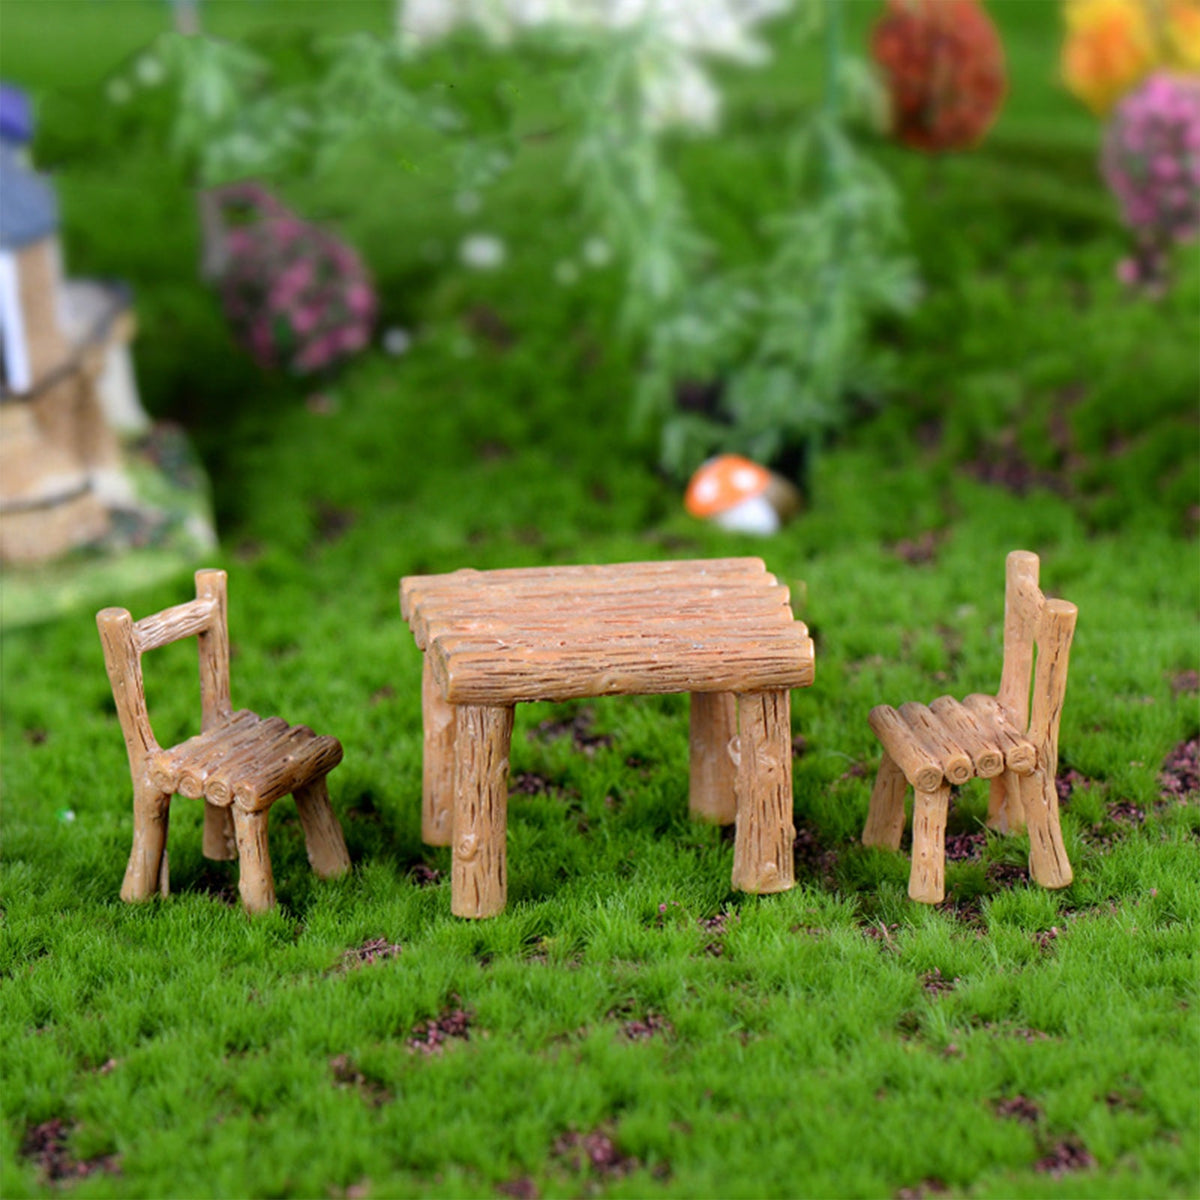 A World of Nostalgia: Miniature Table & Chairs, Craft Small Houses, and Mushroom House